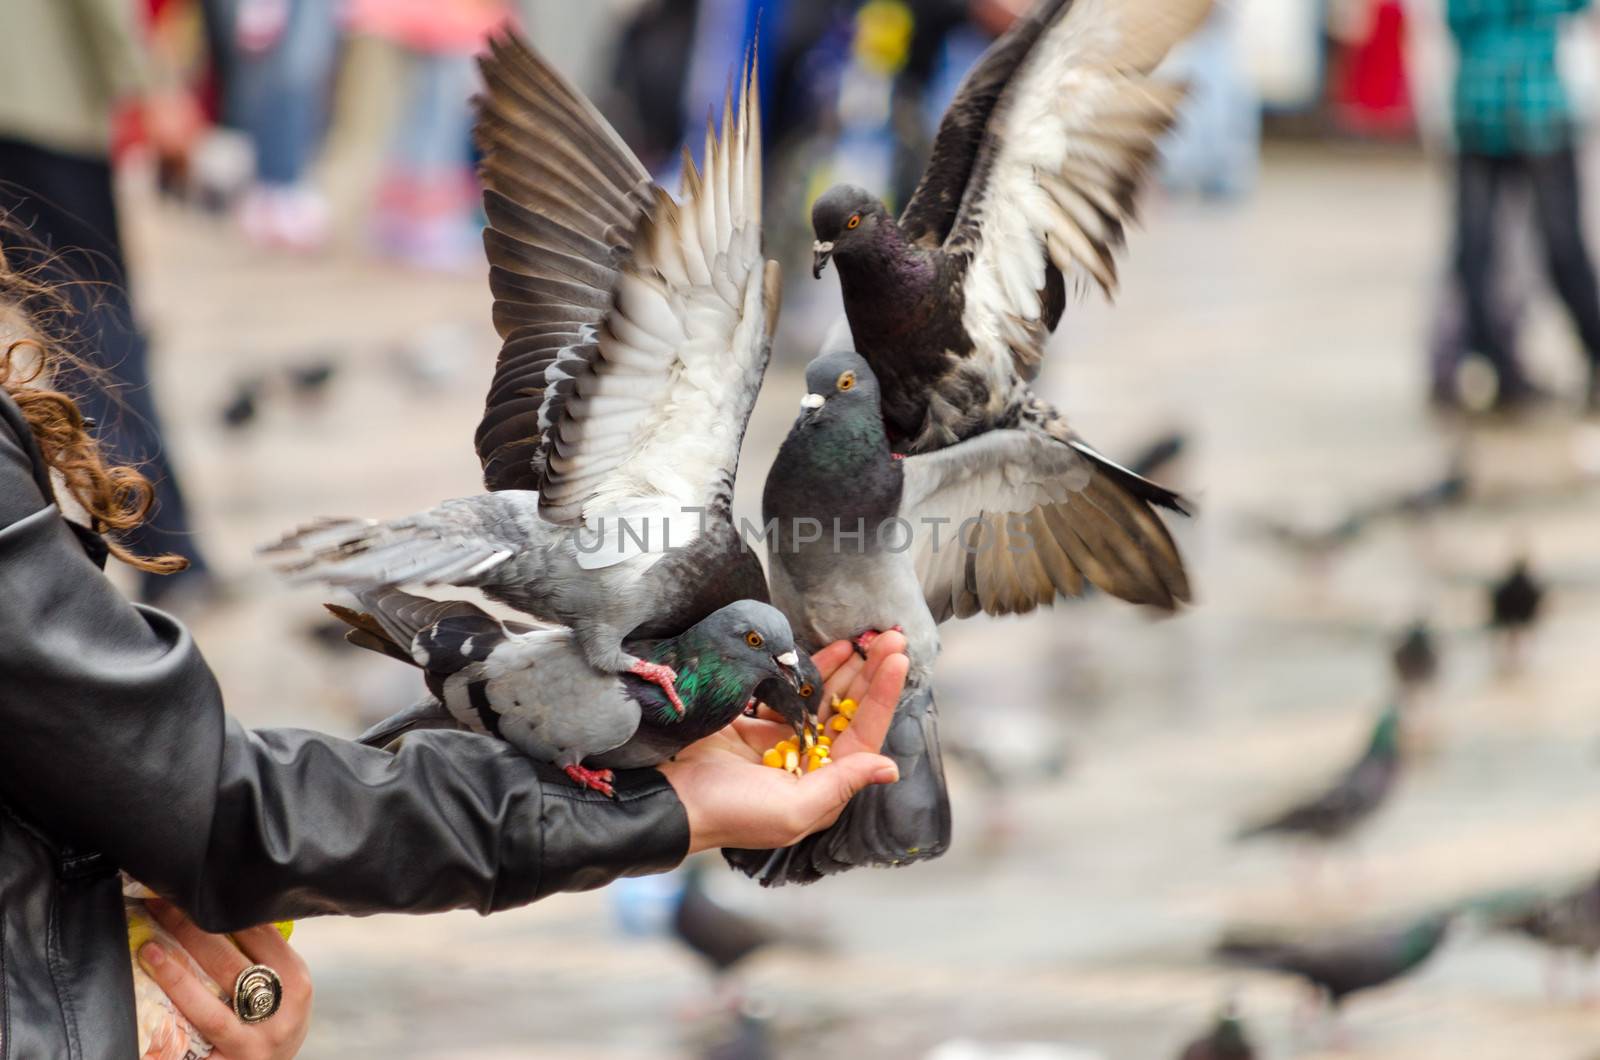 Pigeons Eating from Hand by jkraft5